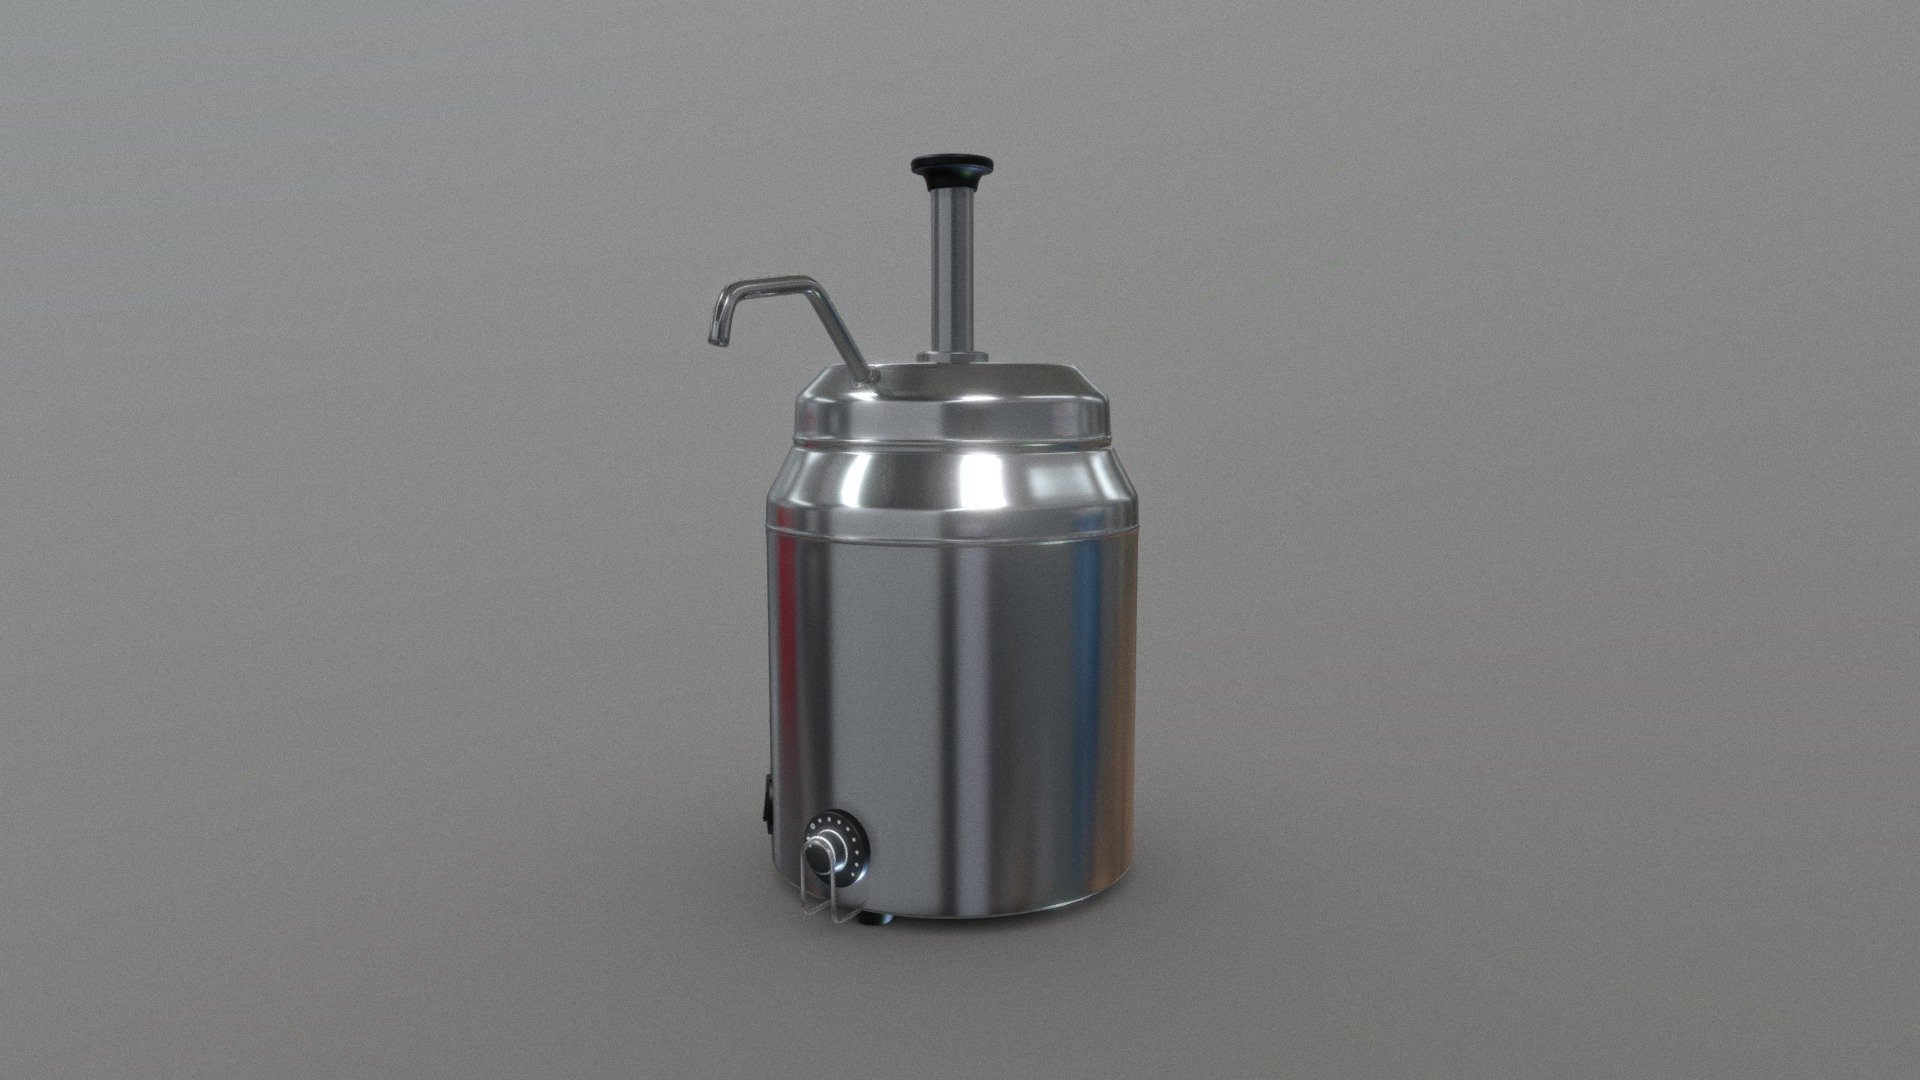 A Fudge Warmer 3D model, useful for visualization purpose or more.

This kind of Hot Fugde Warmer is quite common and is used commercially in kitchens, food trucks etc, its a medium detailed model with a switch, knob, another container inside along with steam pipe.

All parts are seperate so It can be modified easily.

If you have any issue or query regarding this model or want to request other types of models, let me know in the comments 3d model